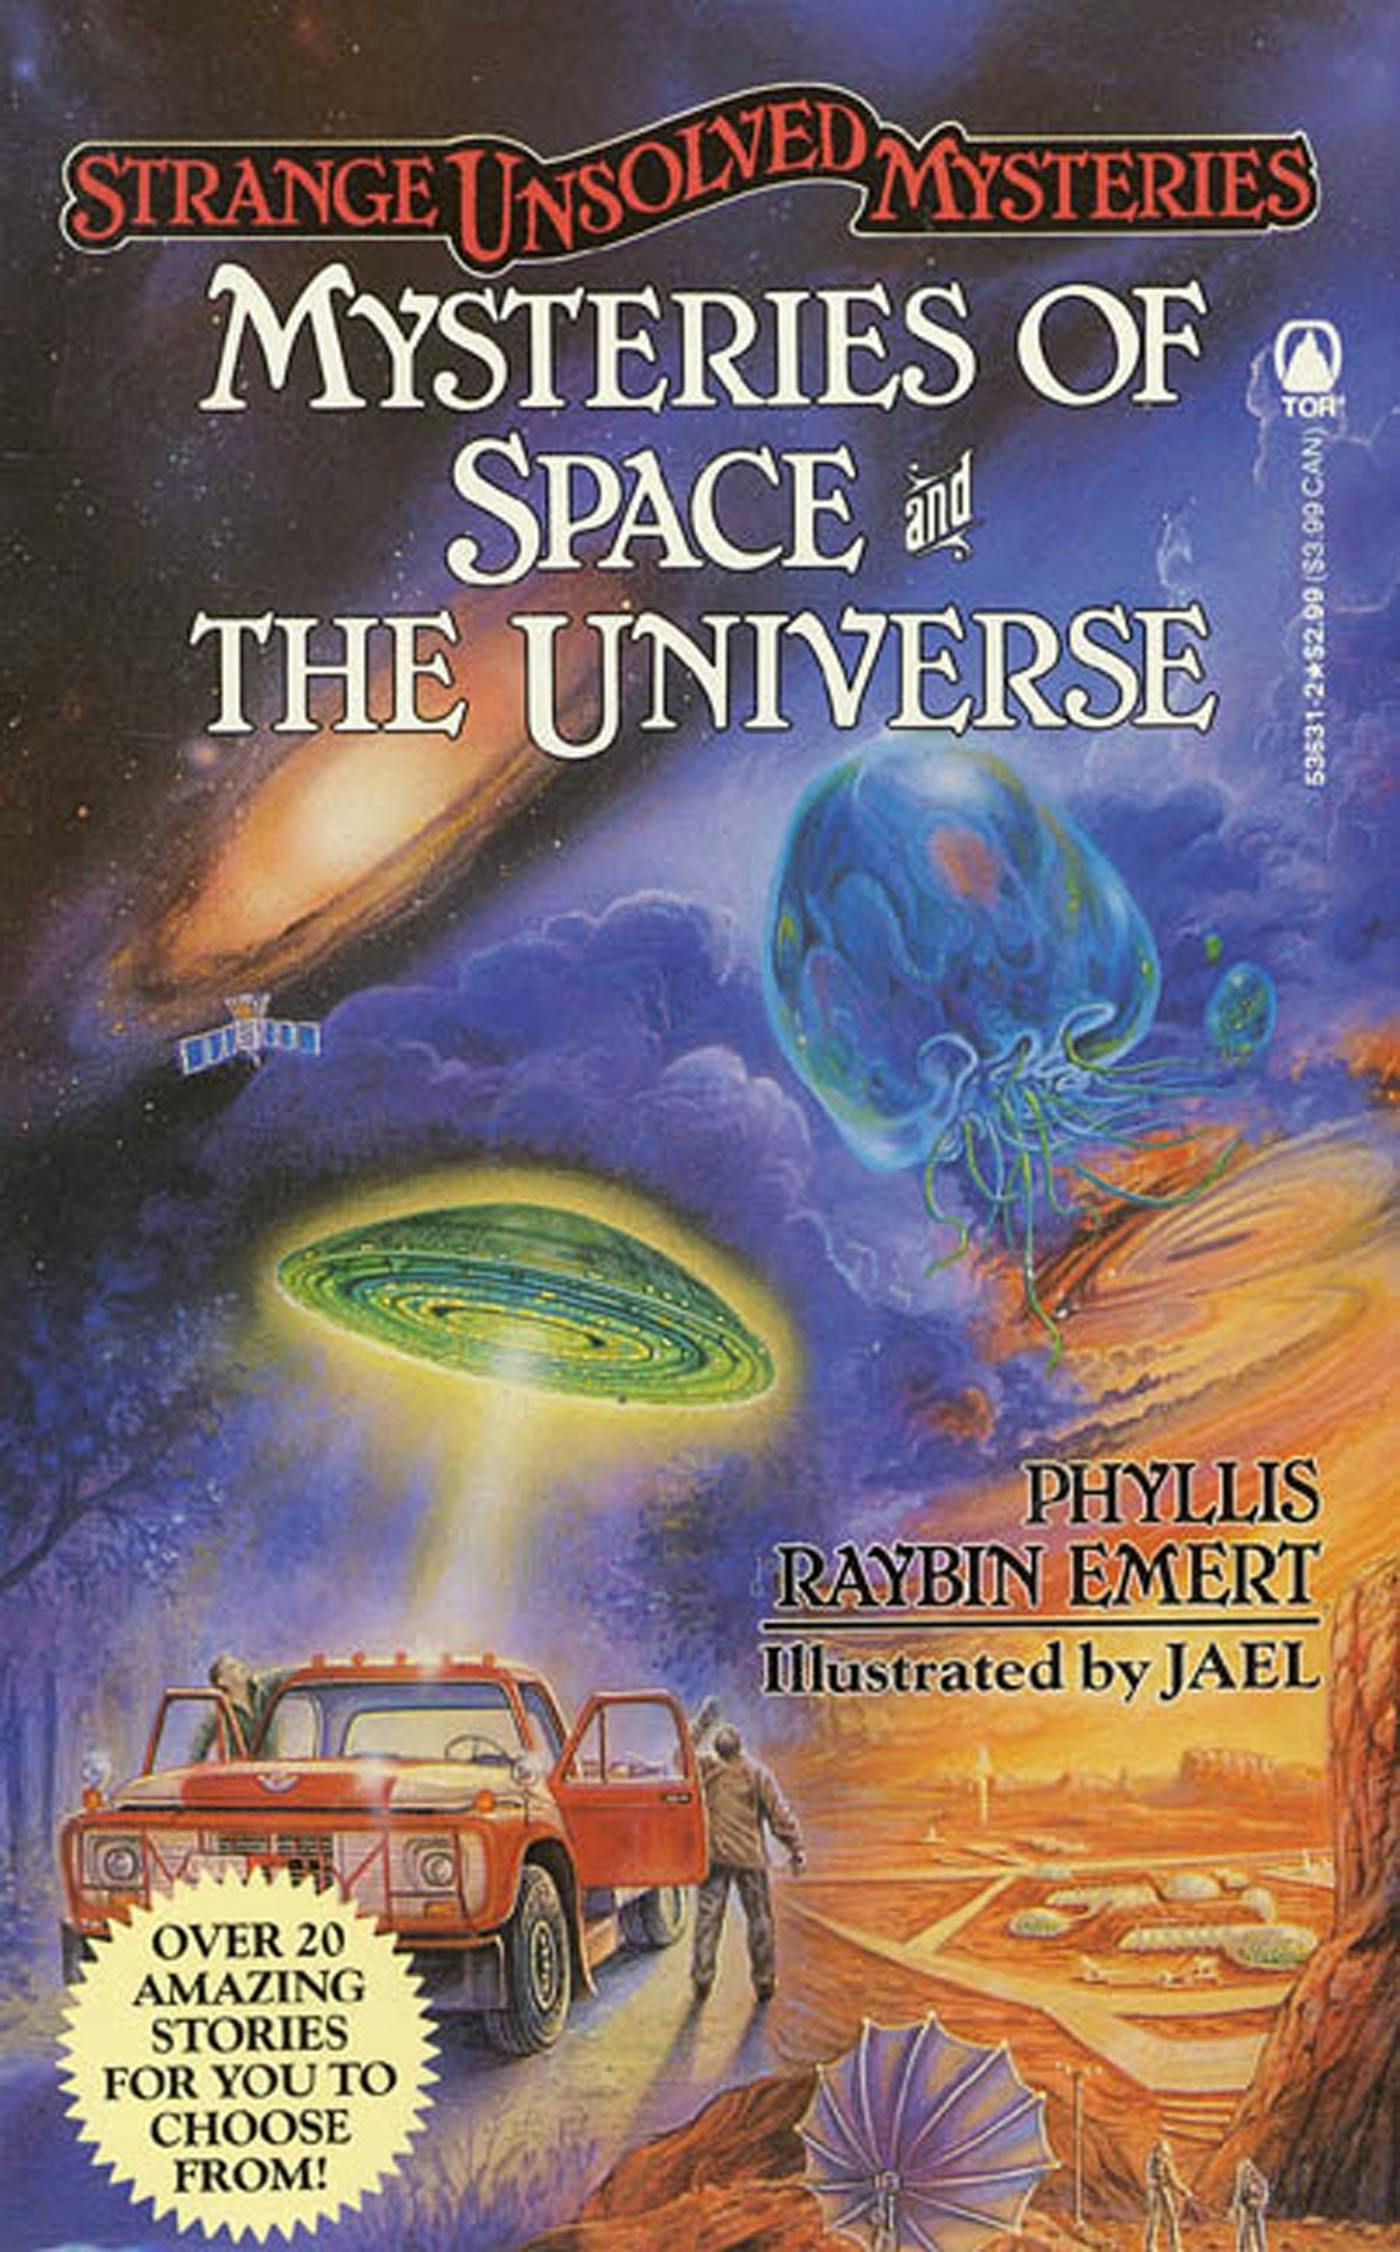 Cover for the book titled as: Mysteries of Space and the Universe